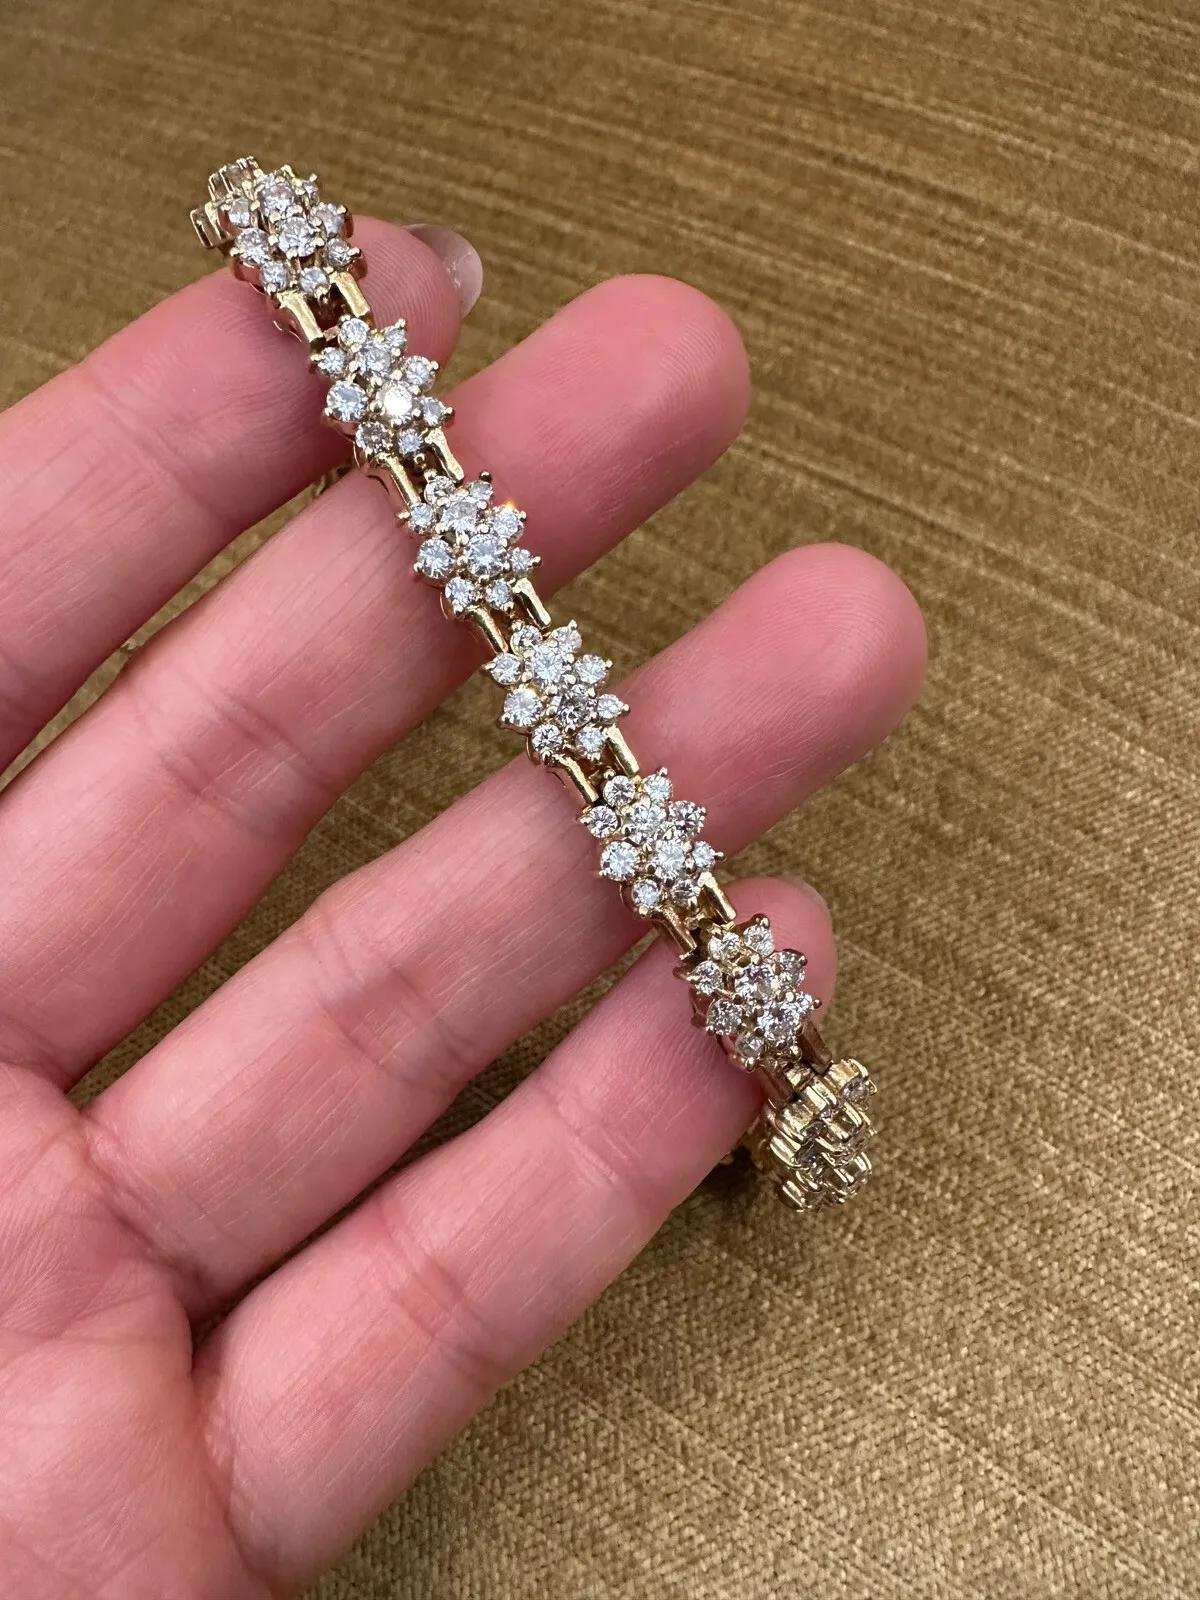 Vintage Cluster Round Diamond Bracelet 6.00 Carat Total Weight in 14k Yellow Gold 

Diamond Bracelet features 15 Diamond Cluster links composed of bright, lively Round Brilliant Diamonds set in 14k Yellow Gold. The bracelet is secured by a tongue